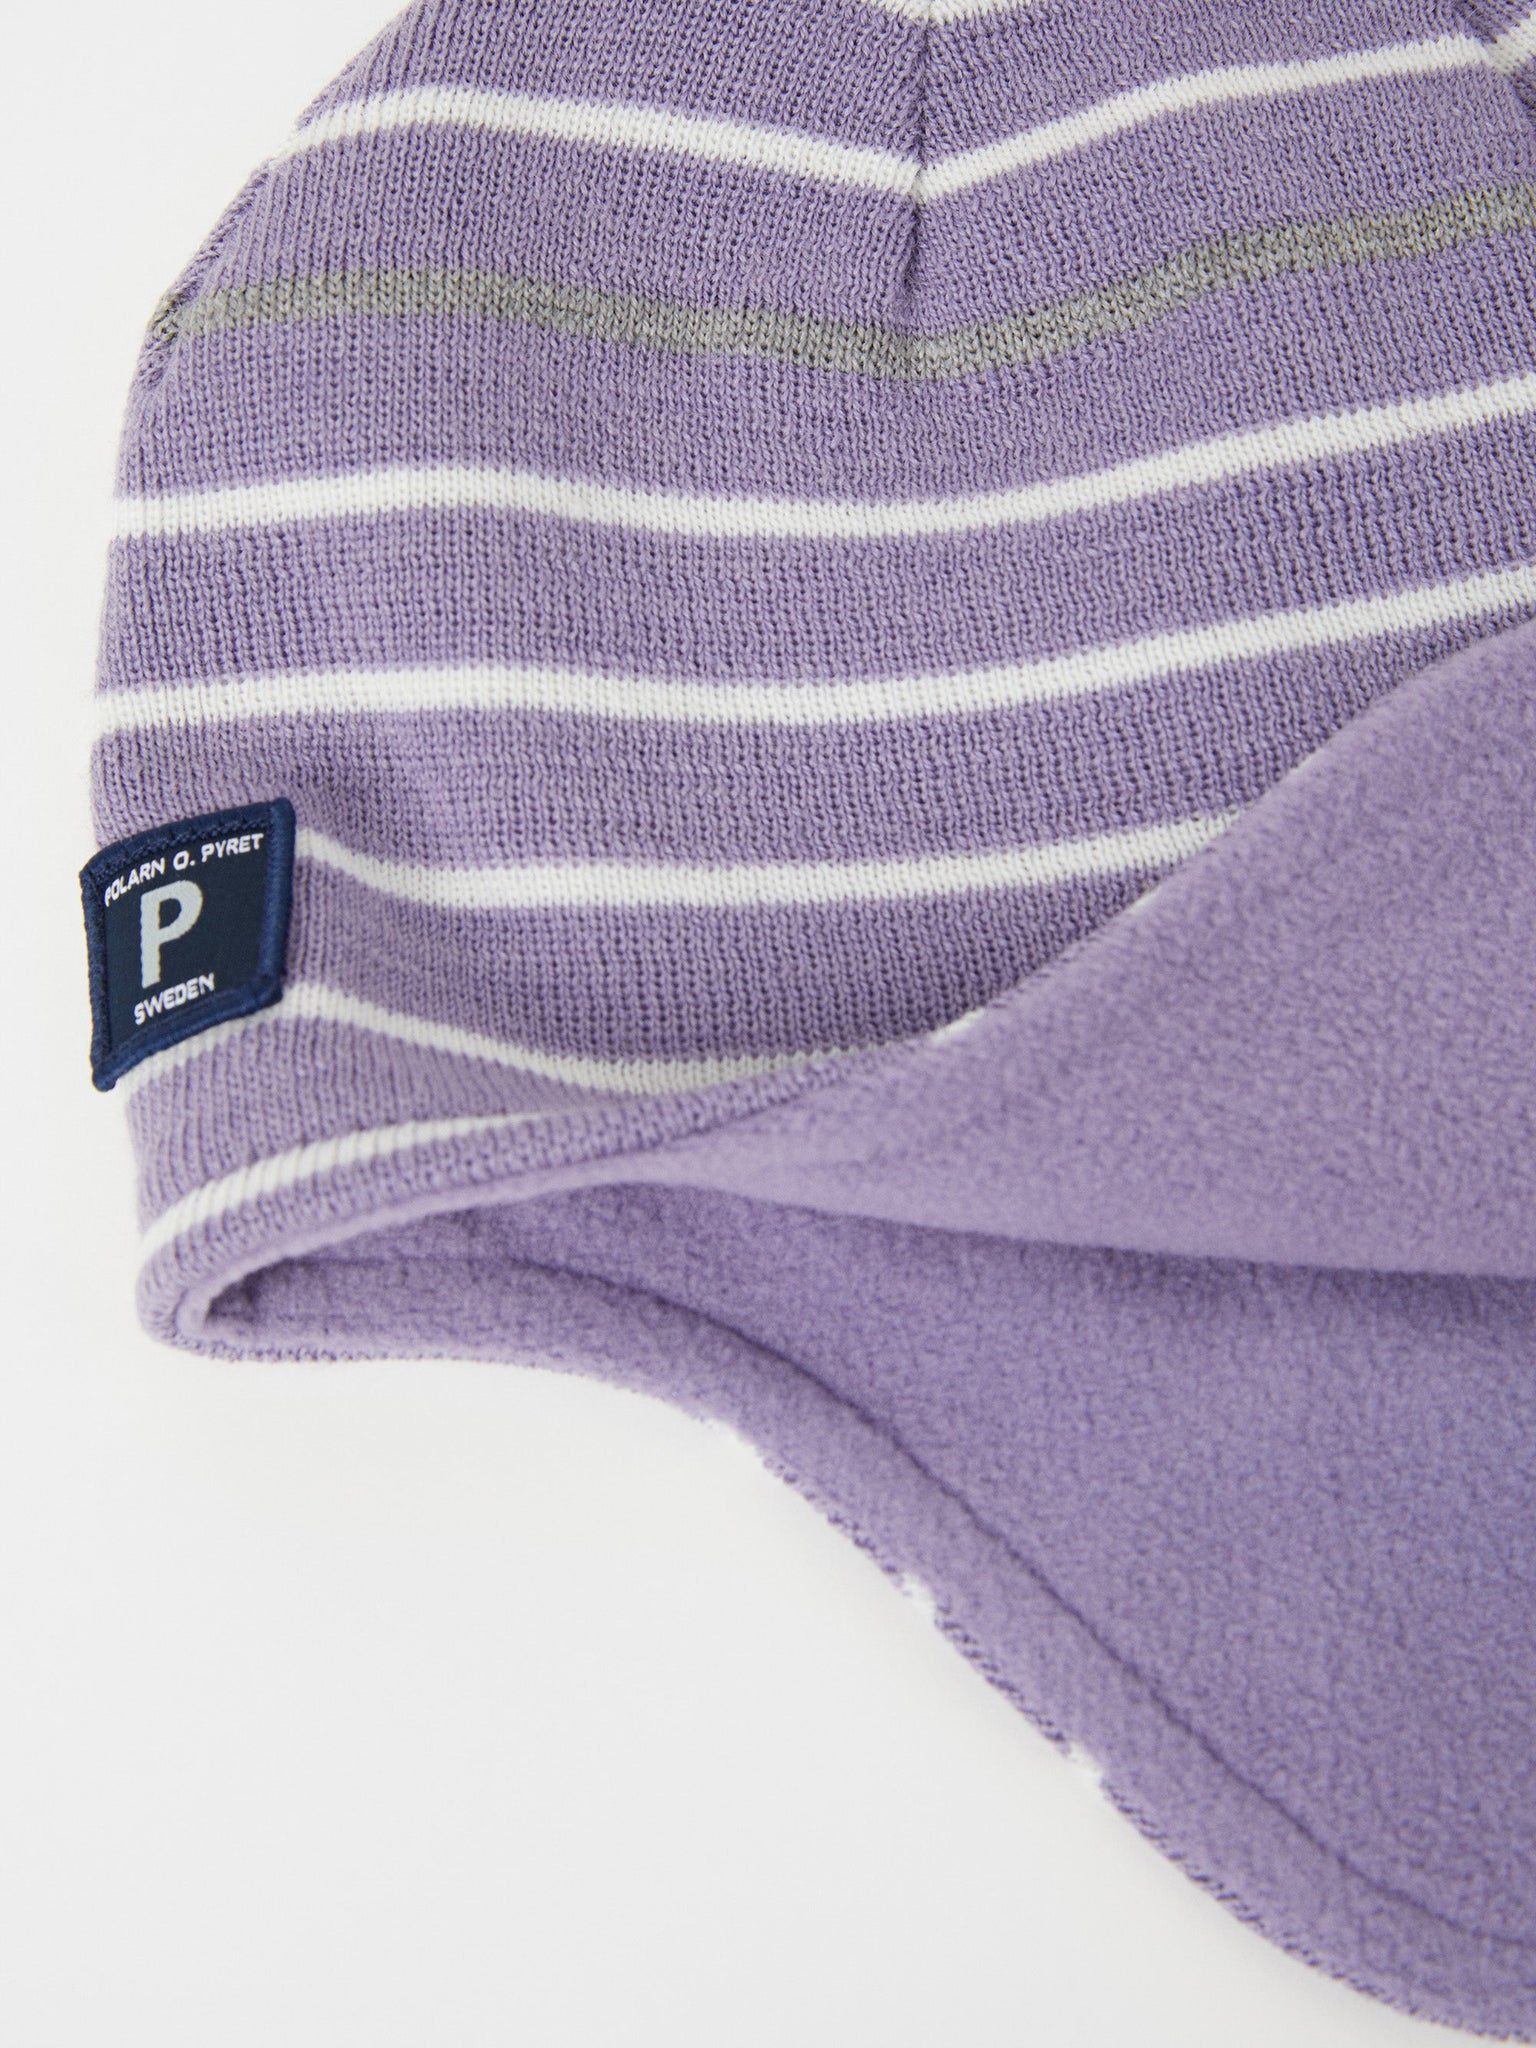 Merino Wool Purple Kids Bobble Hat from the Polarn O. Pyret outerwear collection. Ethically produced kids outerwear.